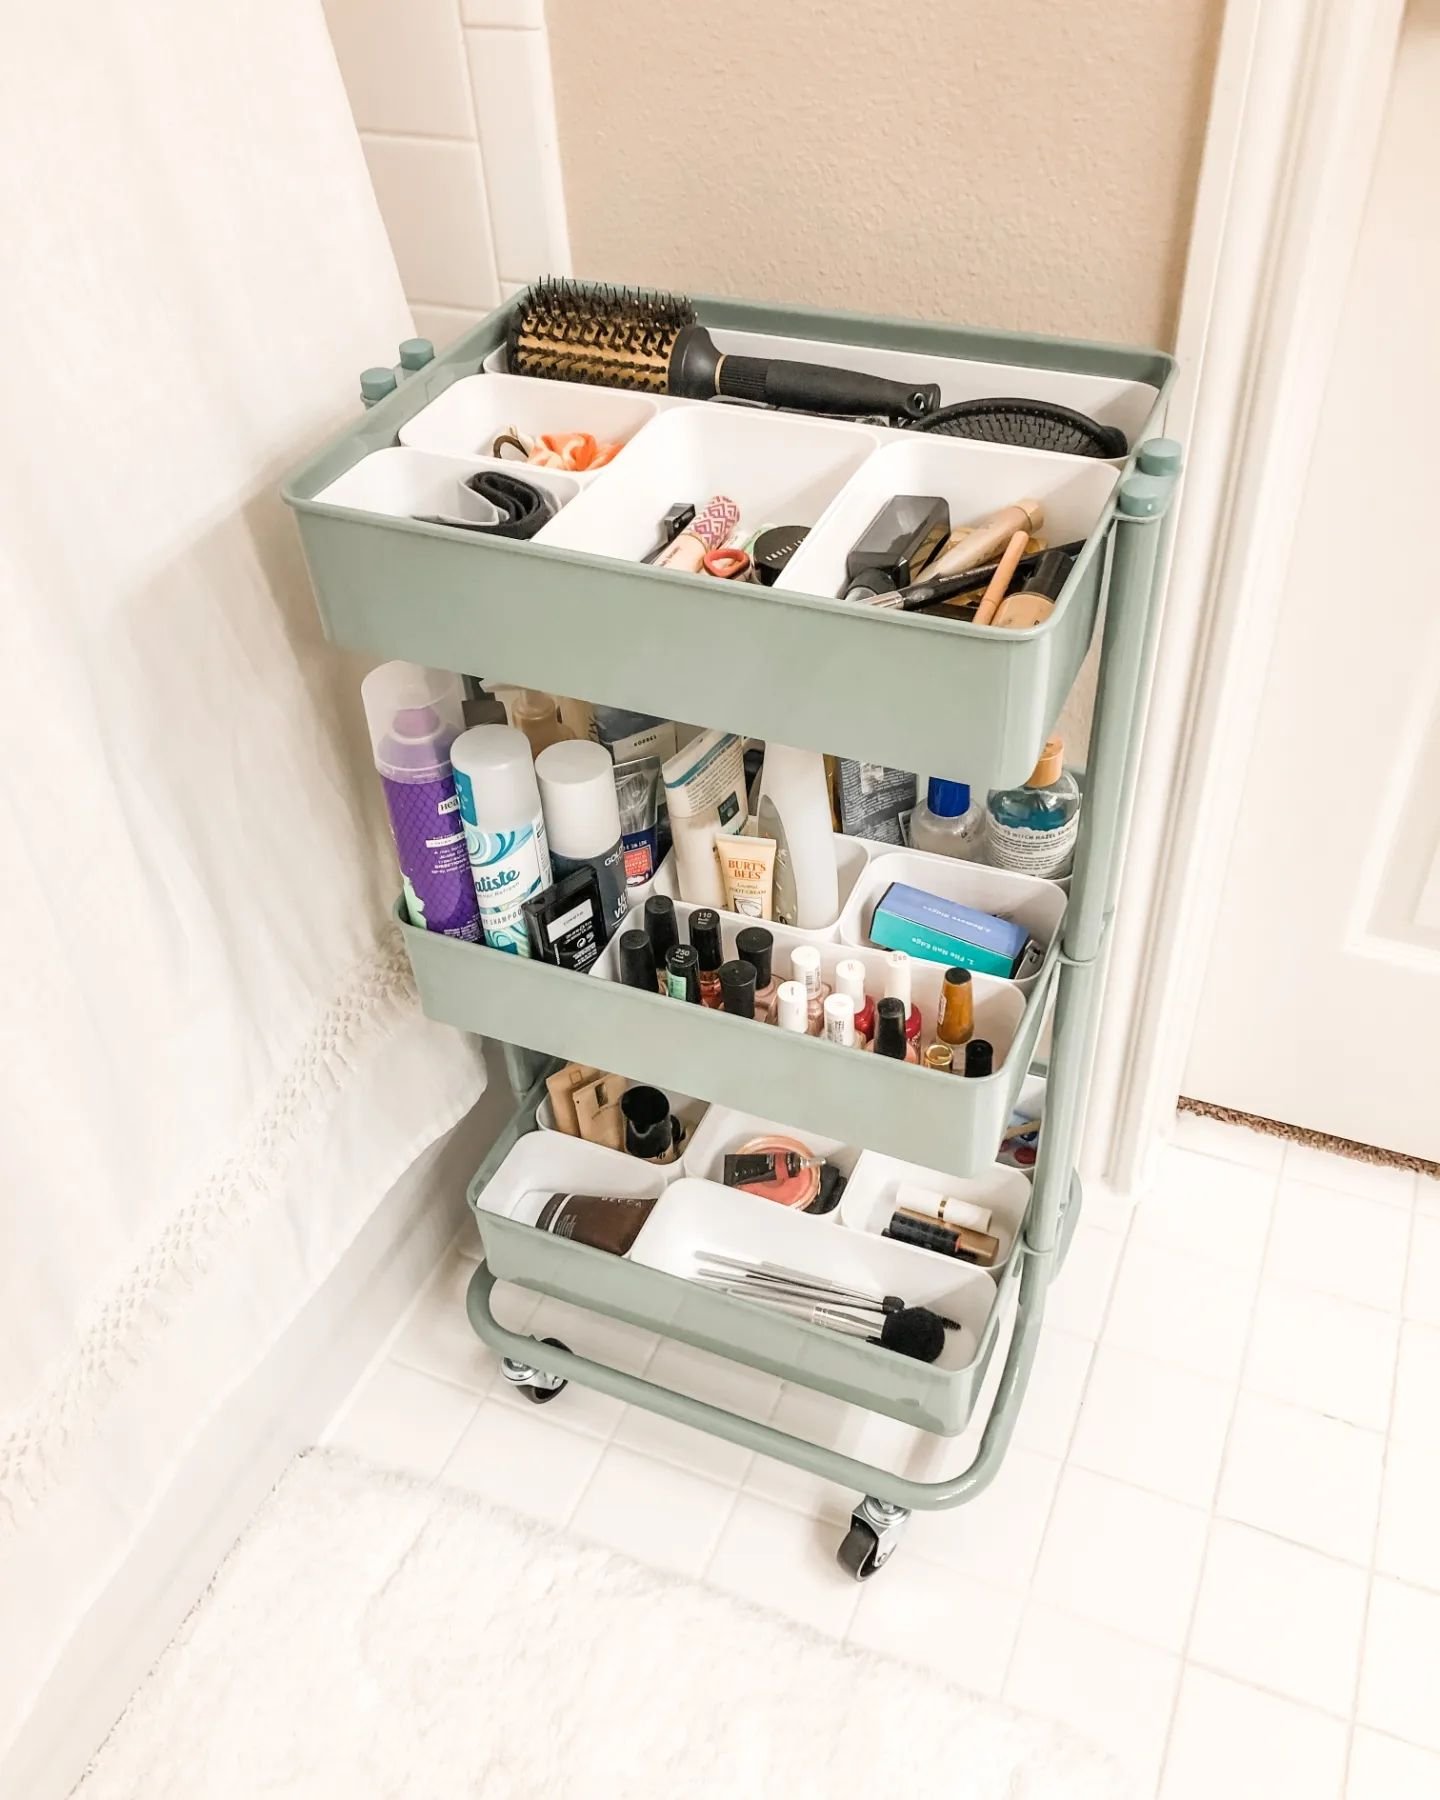 There's no one perfect organizing product for every bathroom!

☎️ If you're tired of running in circles when it comes to organizing, I highly recommend booking a free phone call with us! We will learn about your needs, what's driving you crazy, and h